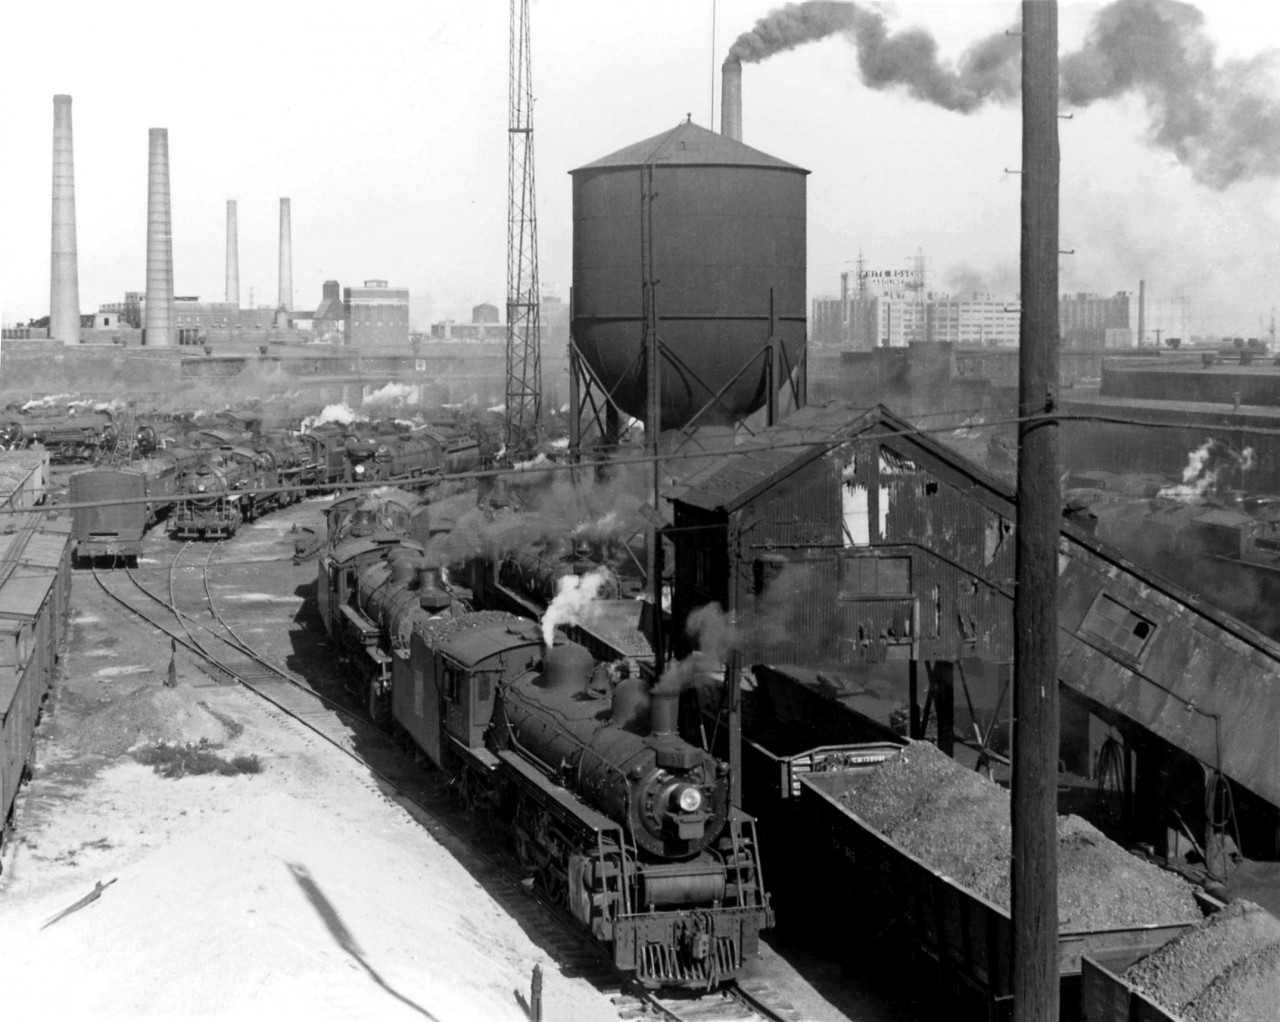 Not a diesel in sight! Steam still reigns supreme at Canadian National's Spadina roundhouse and shop facilities in 1952, as various sizes of steam engines from small switchers to big Northerns sit in downtown Toronto ready for their next assignments.

In the background, one can see various smokestacks (coal was the norm for heating) including those of the Central Heating Plant near CPR's neighbouring John St. Roundhouse. The White Rose gasoline signage in the background is on the roof of the Terminal Warehouse building, along the harbourfront.